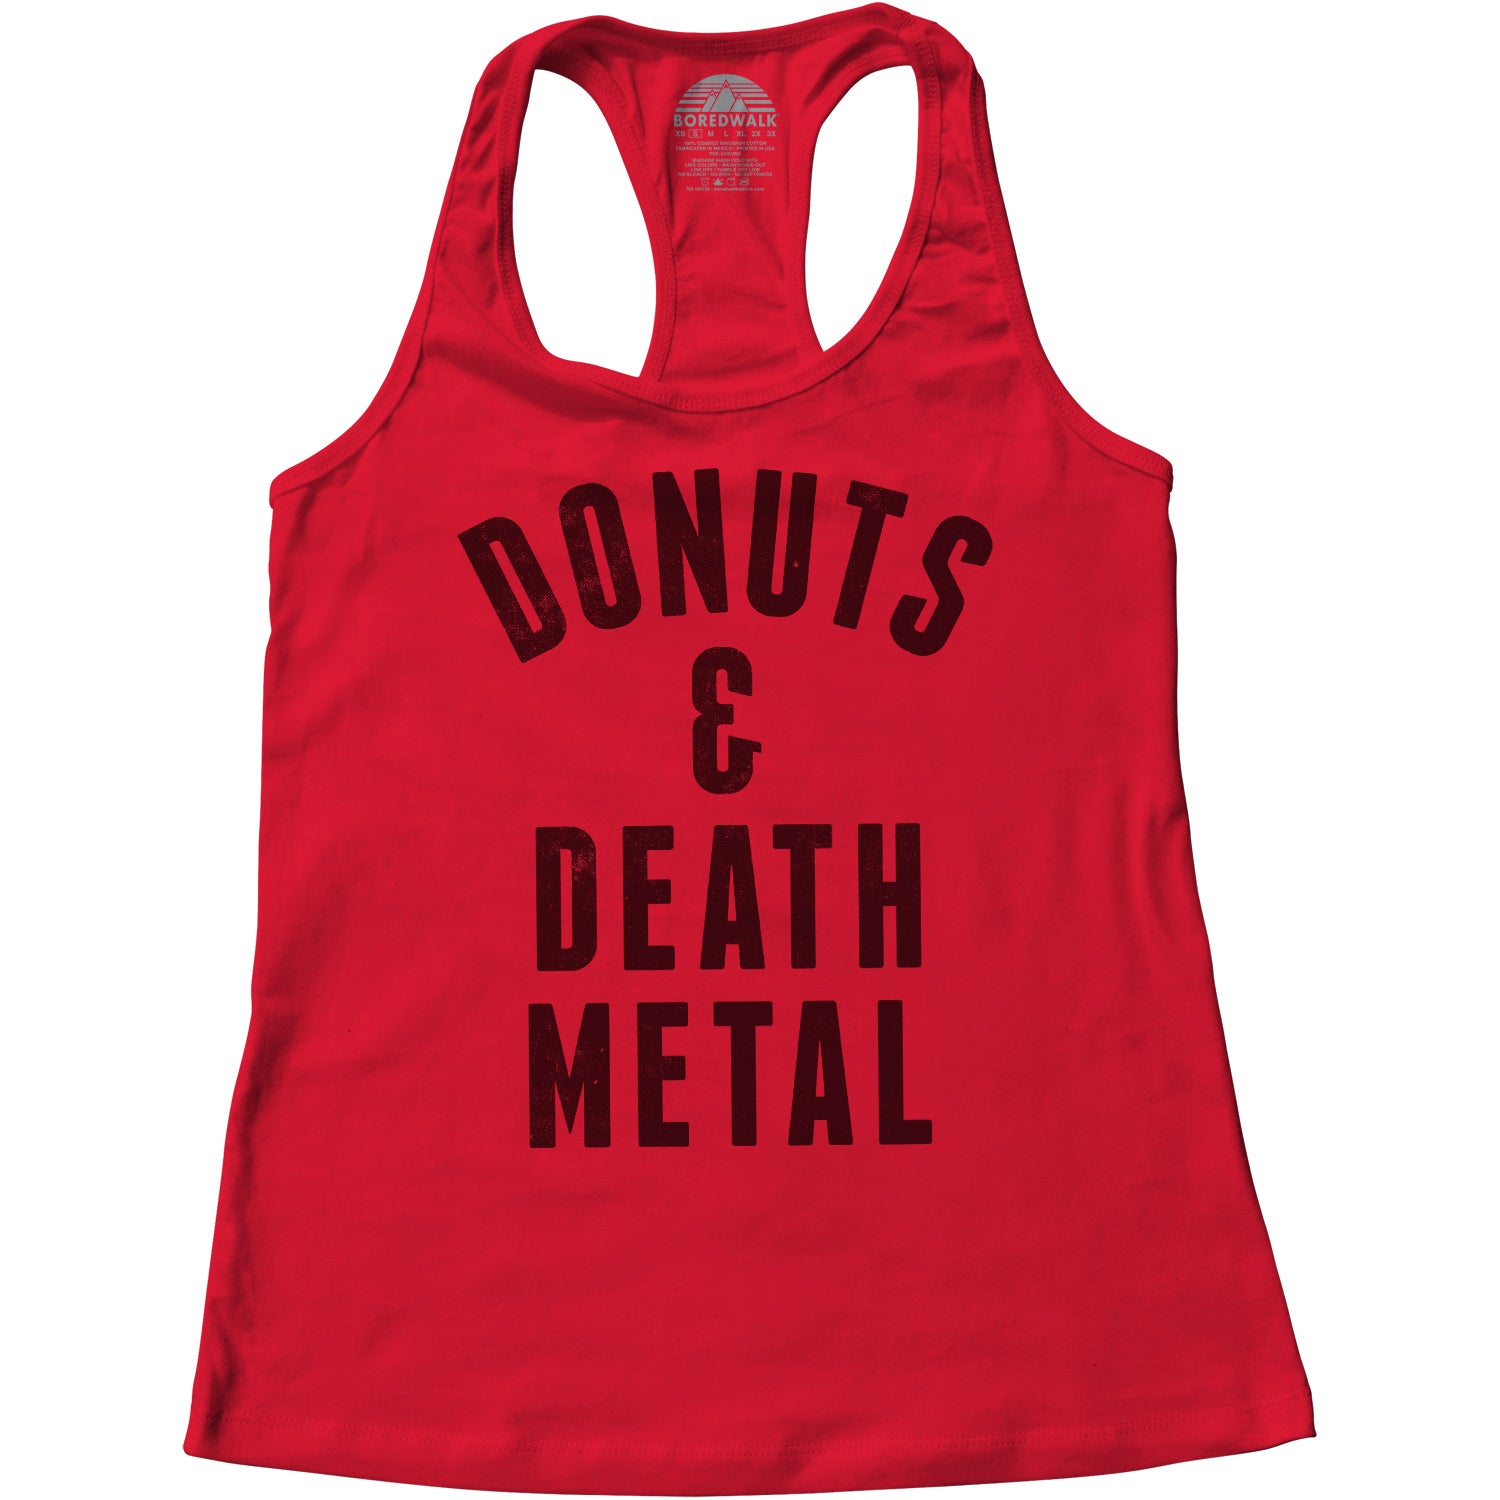 Women's Donuts and Death Metal Racerback Tank Top